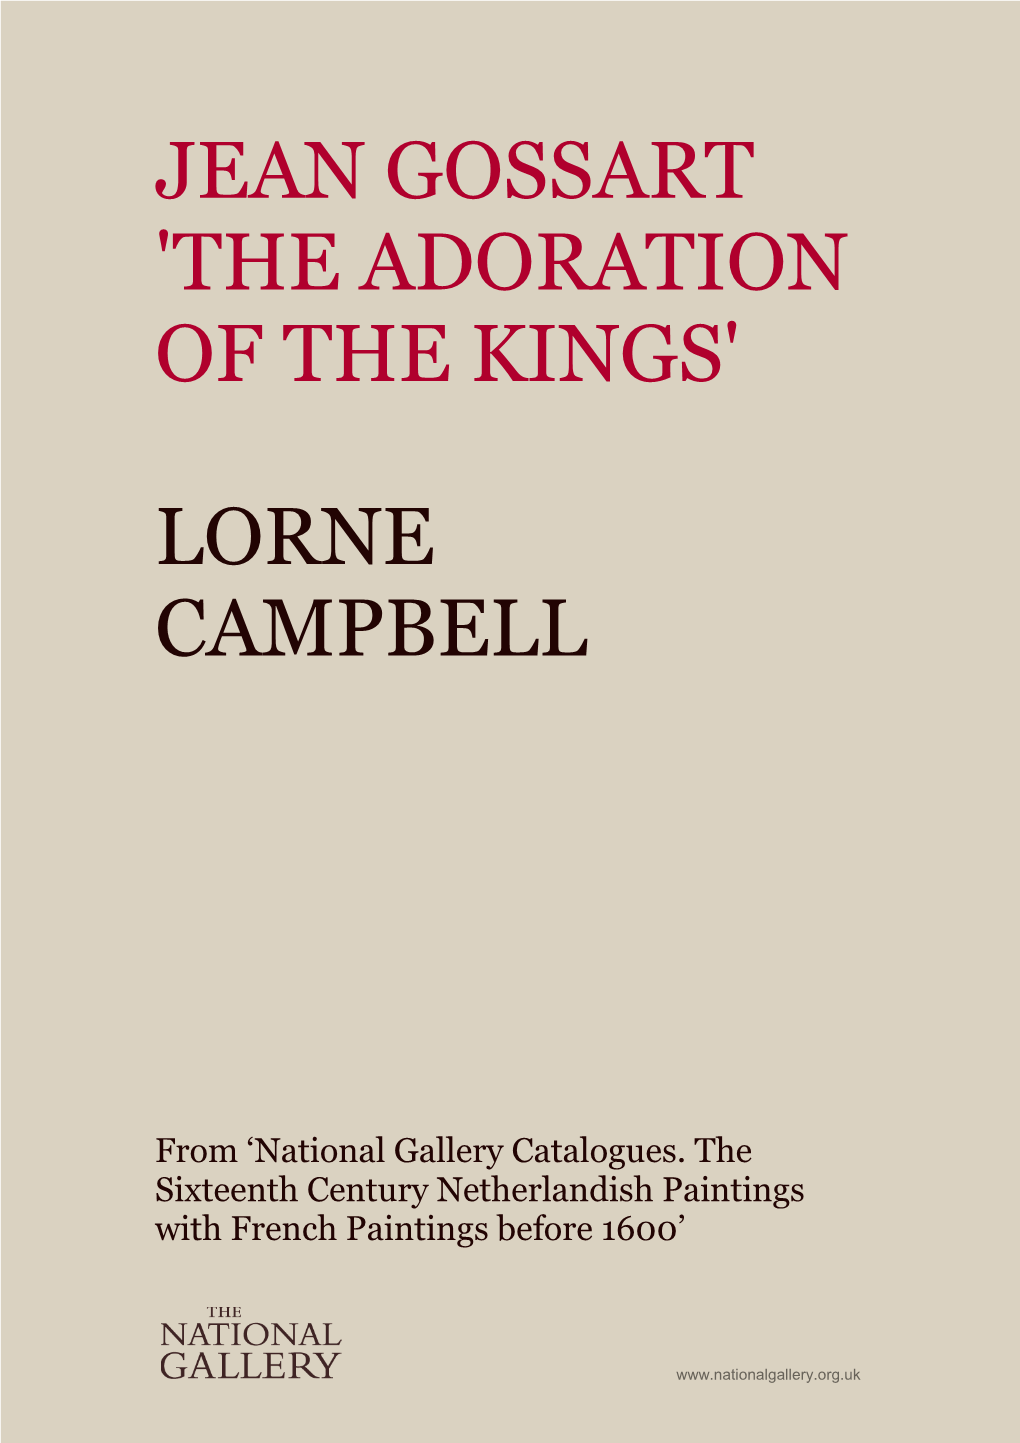 Jean Gossart 'The Adoration of the Kings' Lorne Campbell